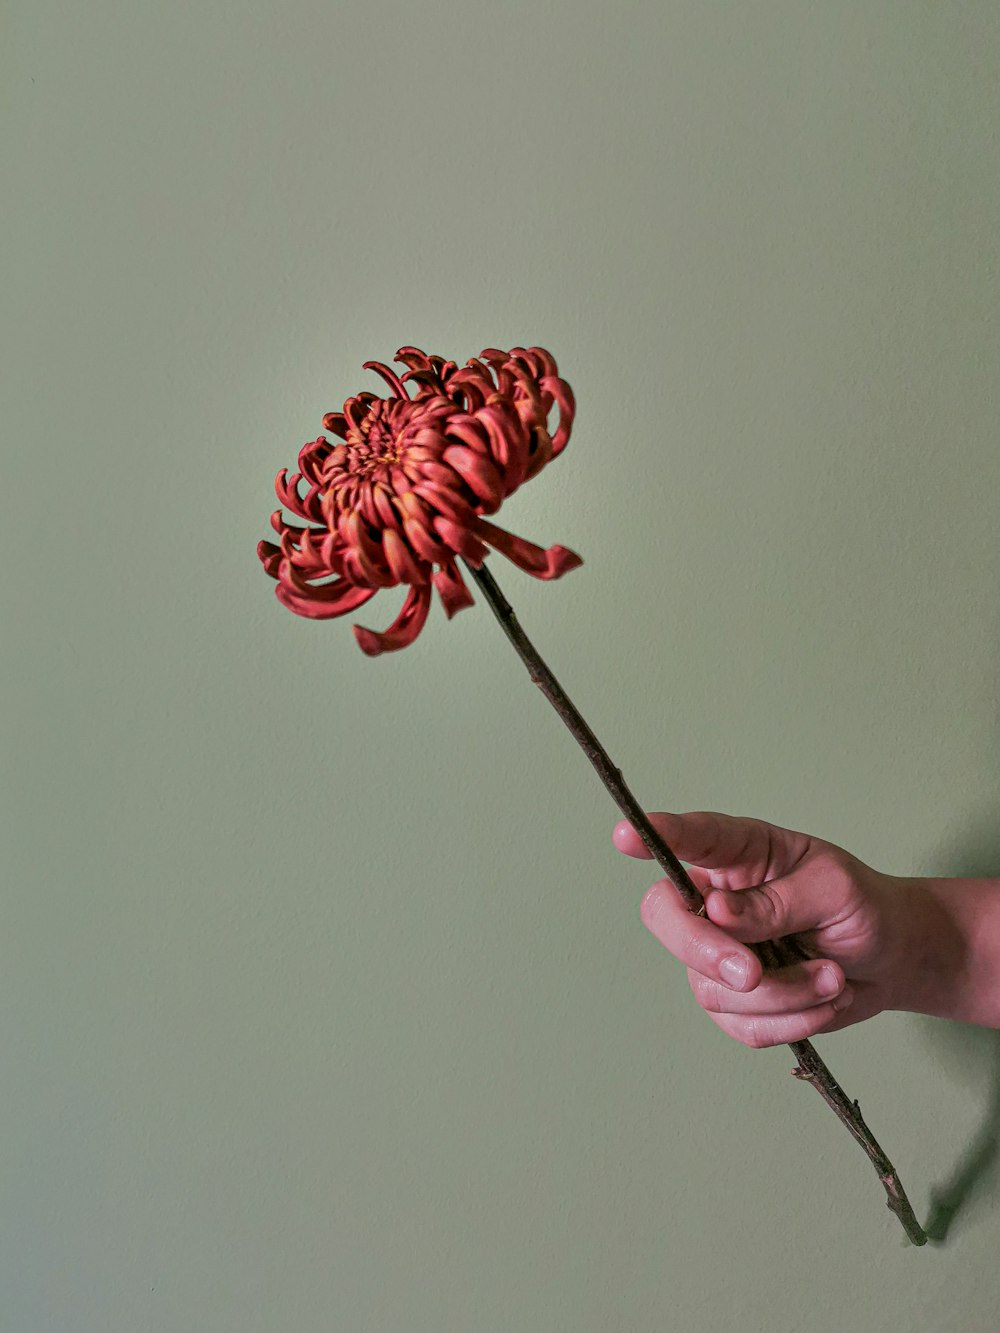 person holding red flower with black stick